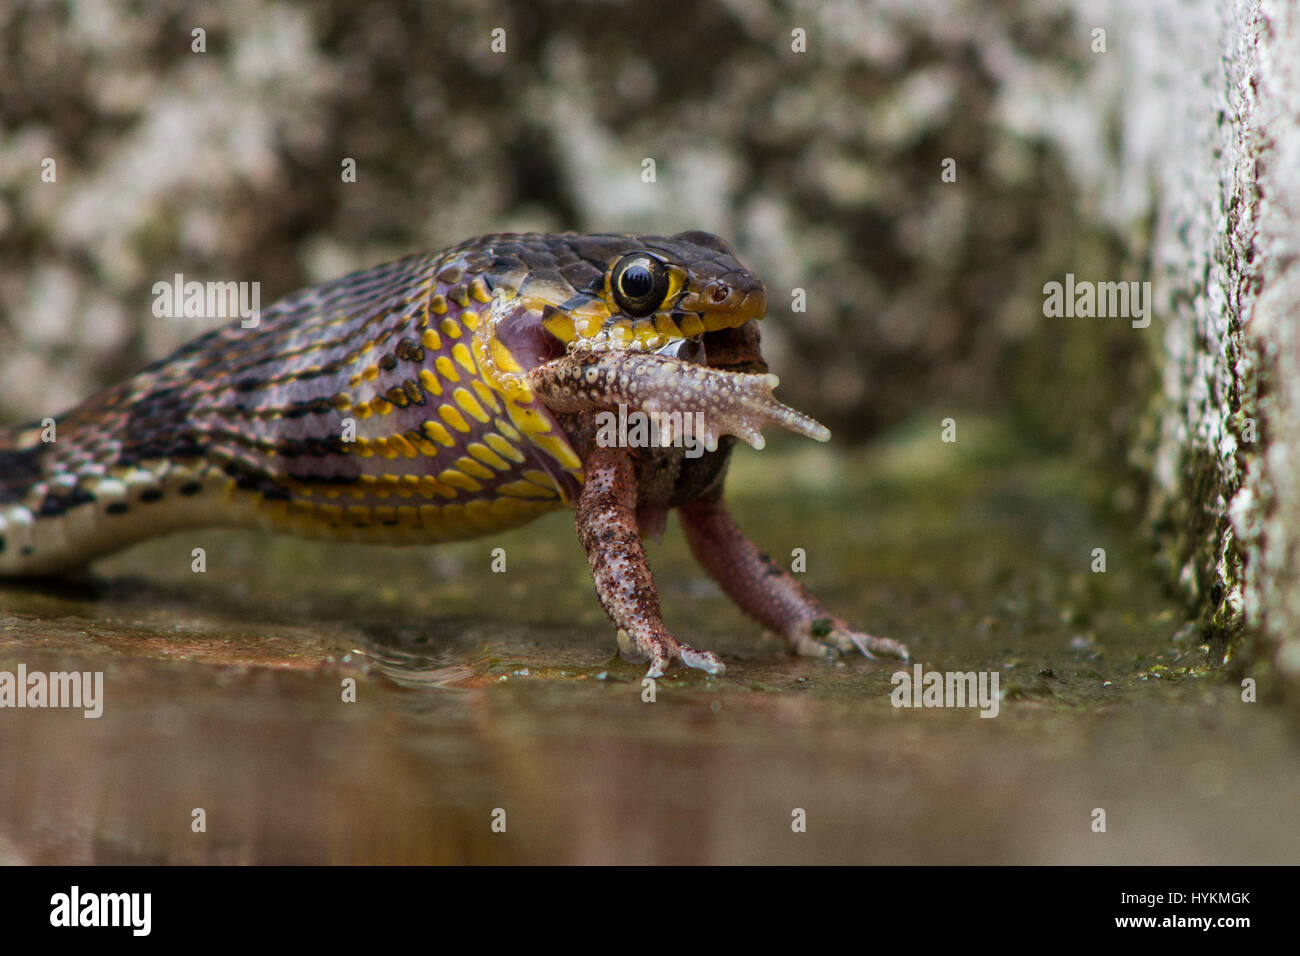 https://c8.alamy.com/comp/HYKMGK/daang-forest-india-this-snake-certainly-had-a-frog-in-its-throat-as-HYKMGK.jpg